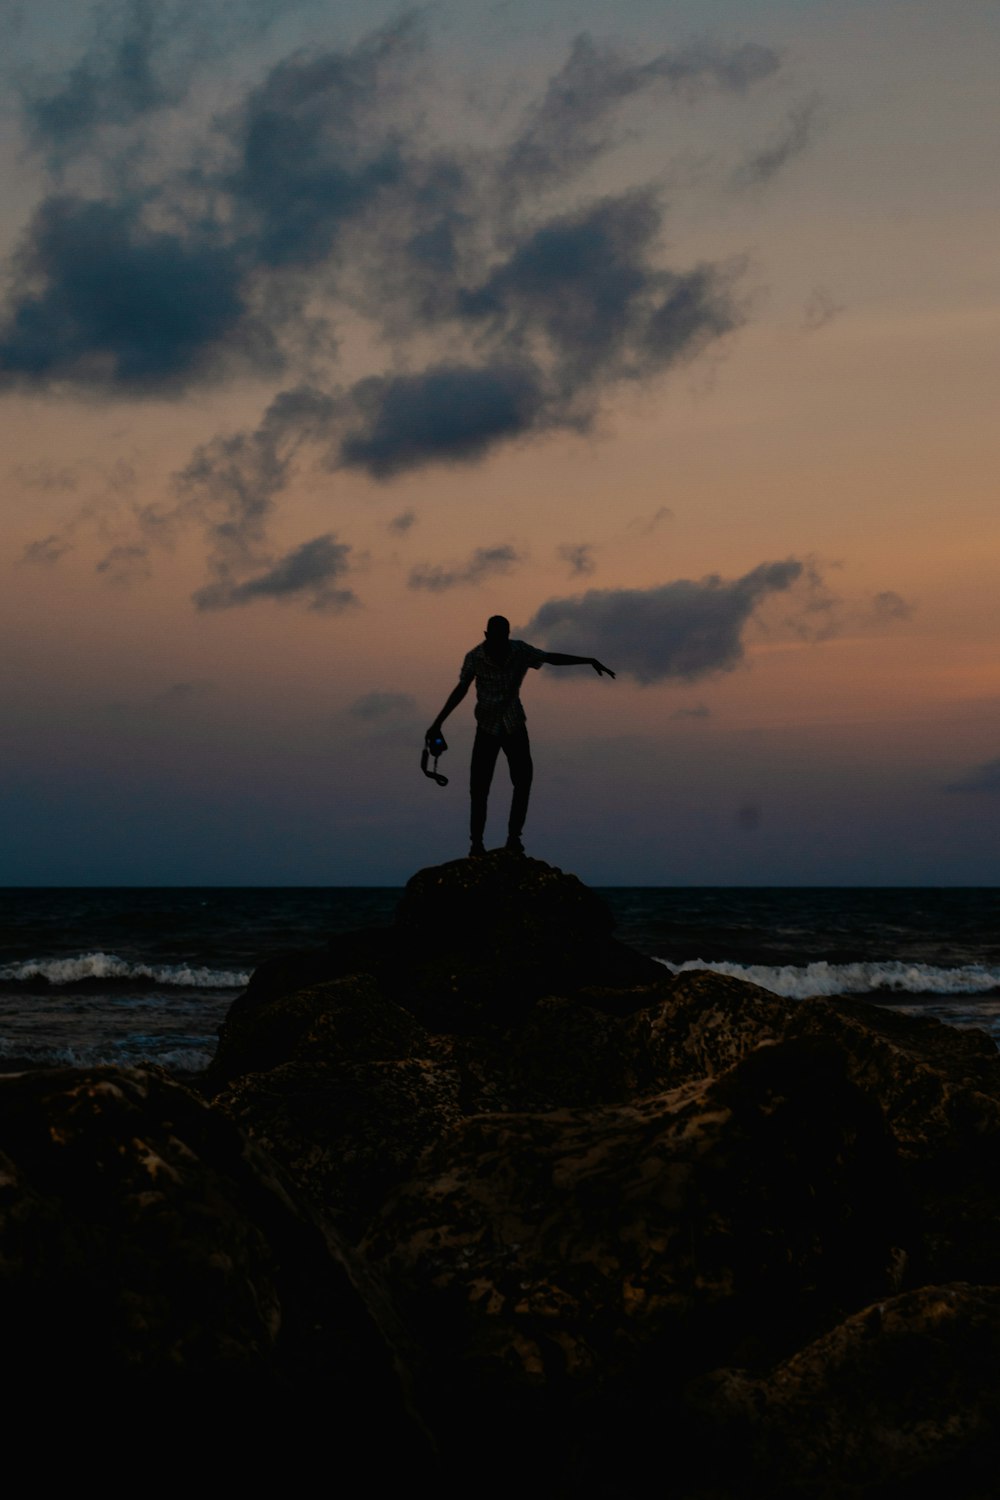 silhouette of man standing on rock formation near body of water during sunset